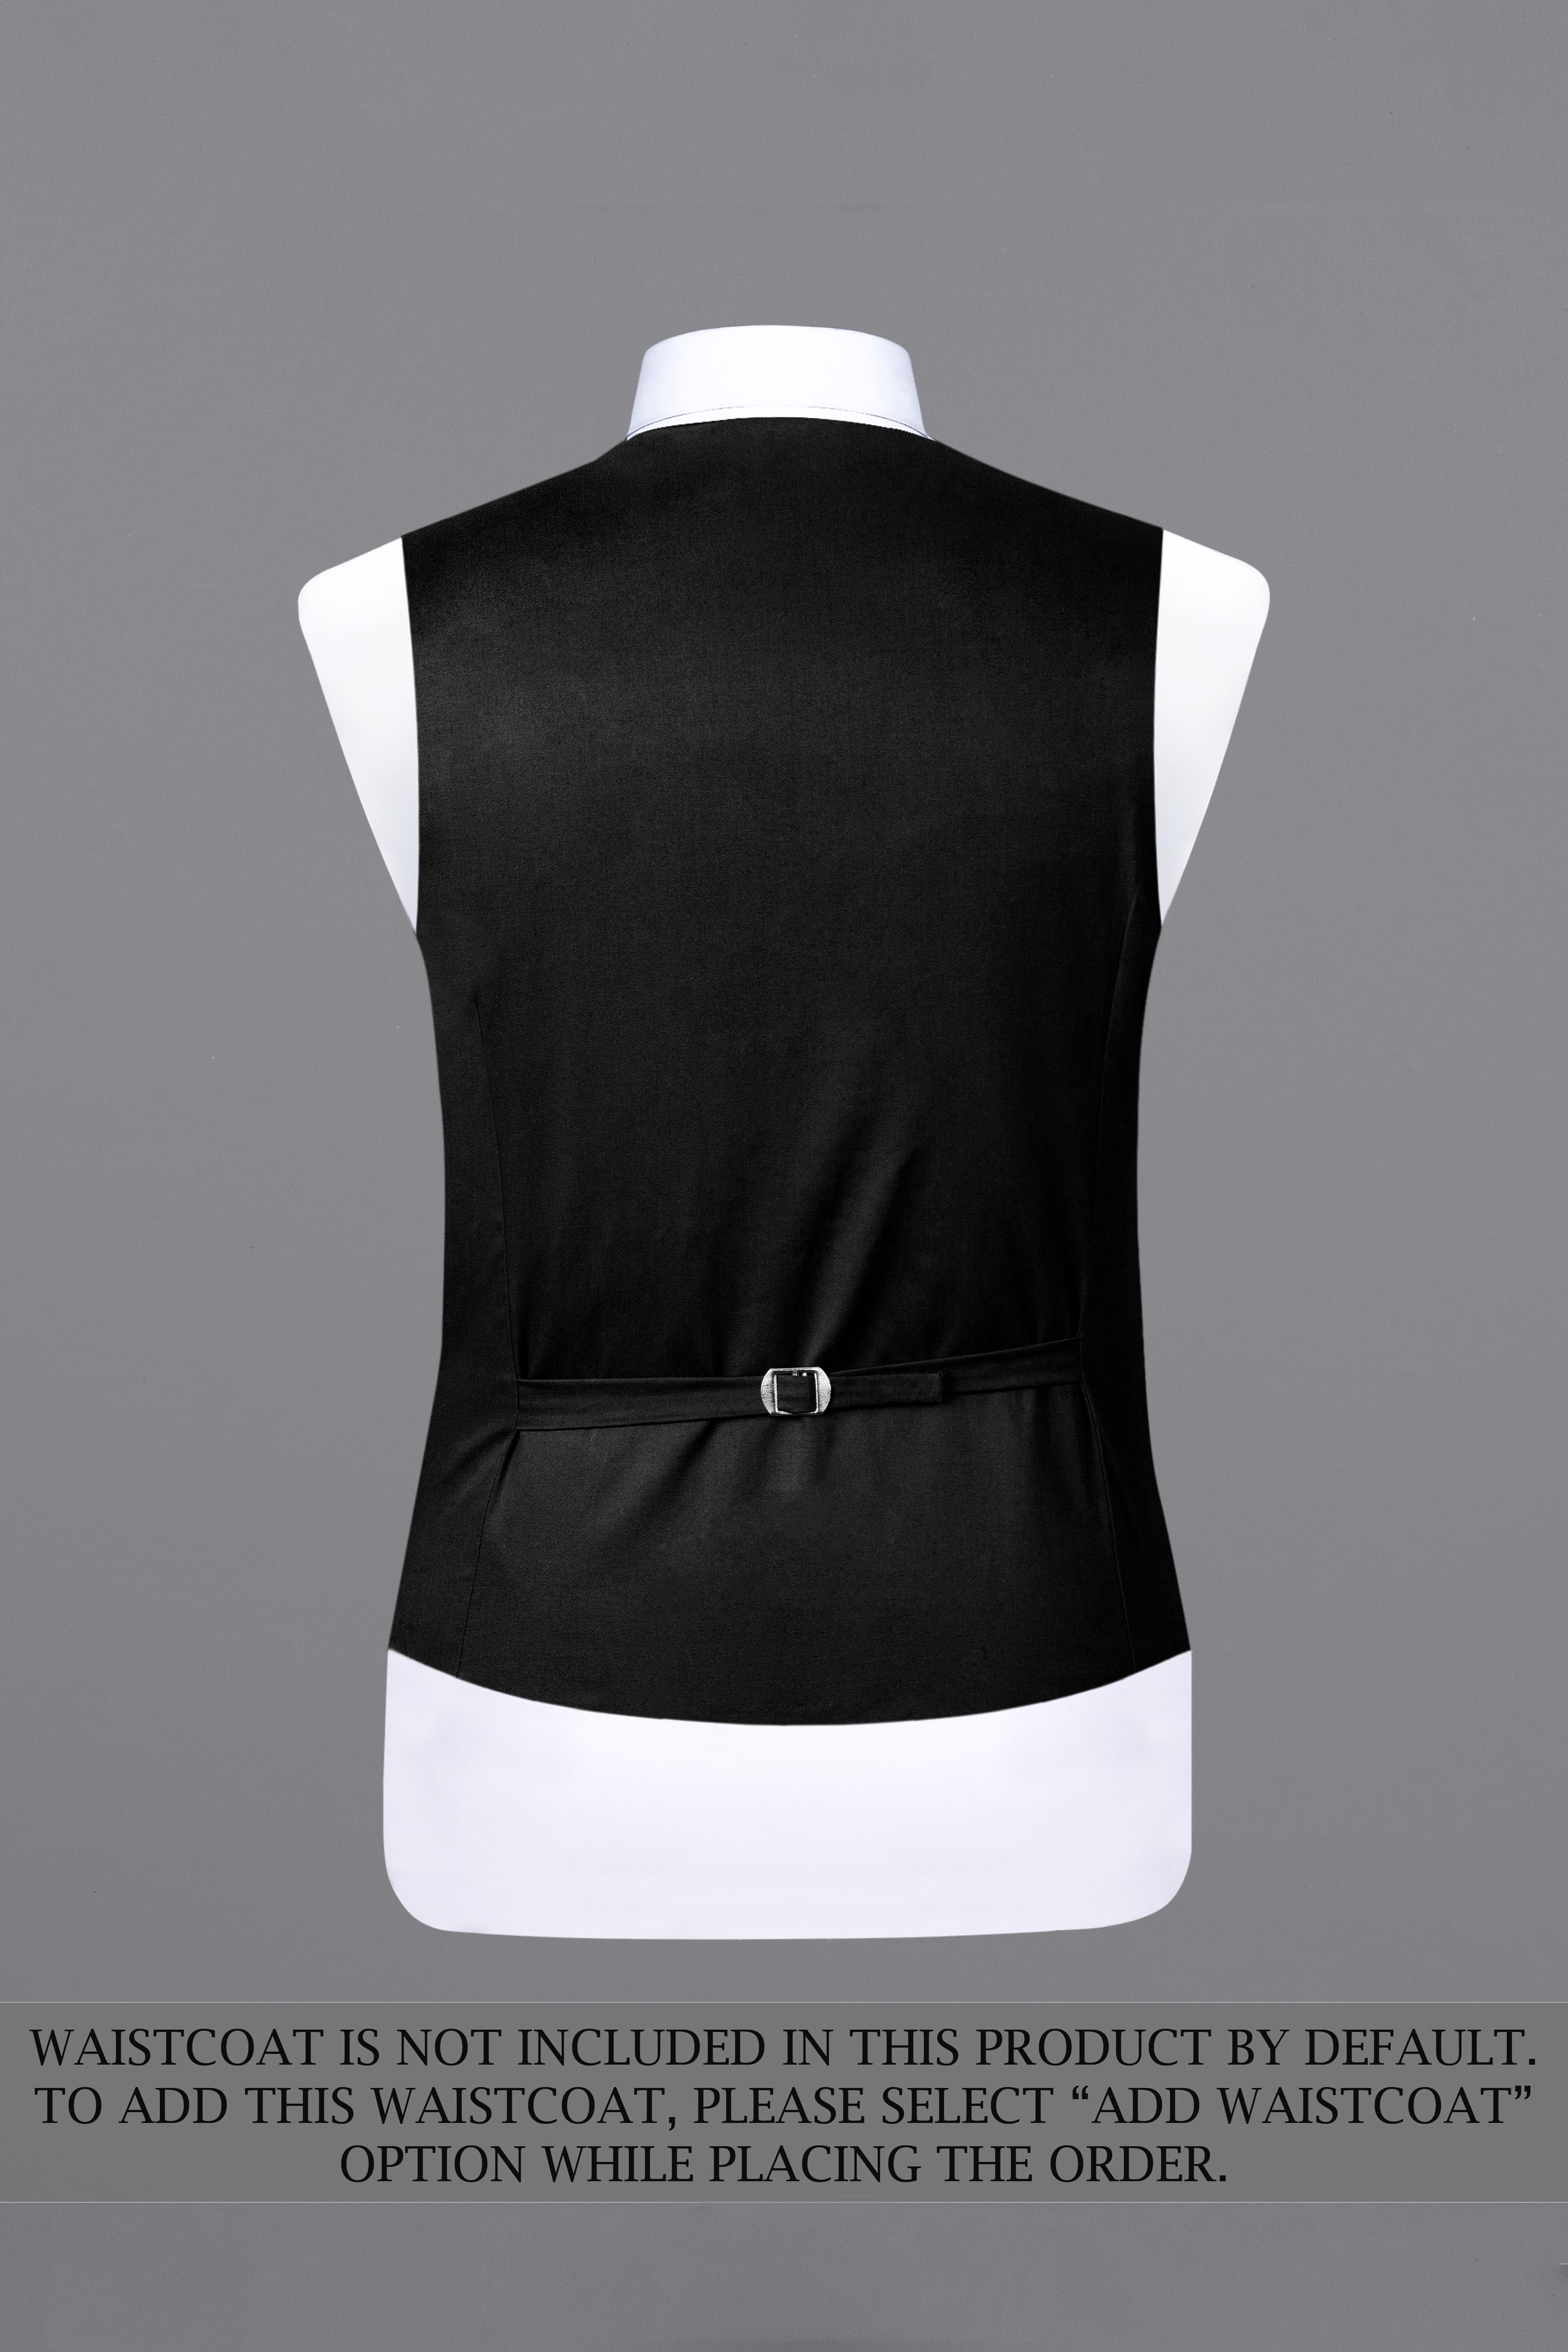 Jade Black Solid Stretchable Premium Cotton Double Breasted Traveler Suit